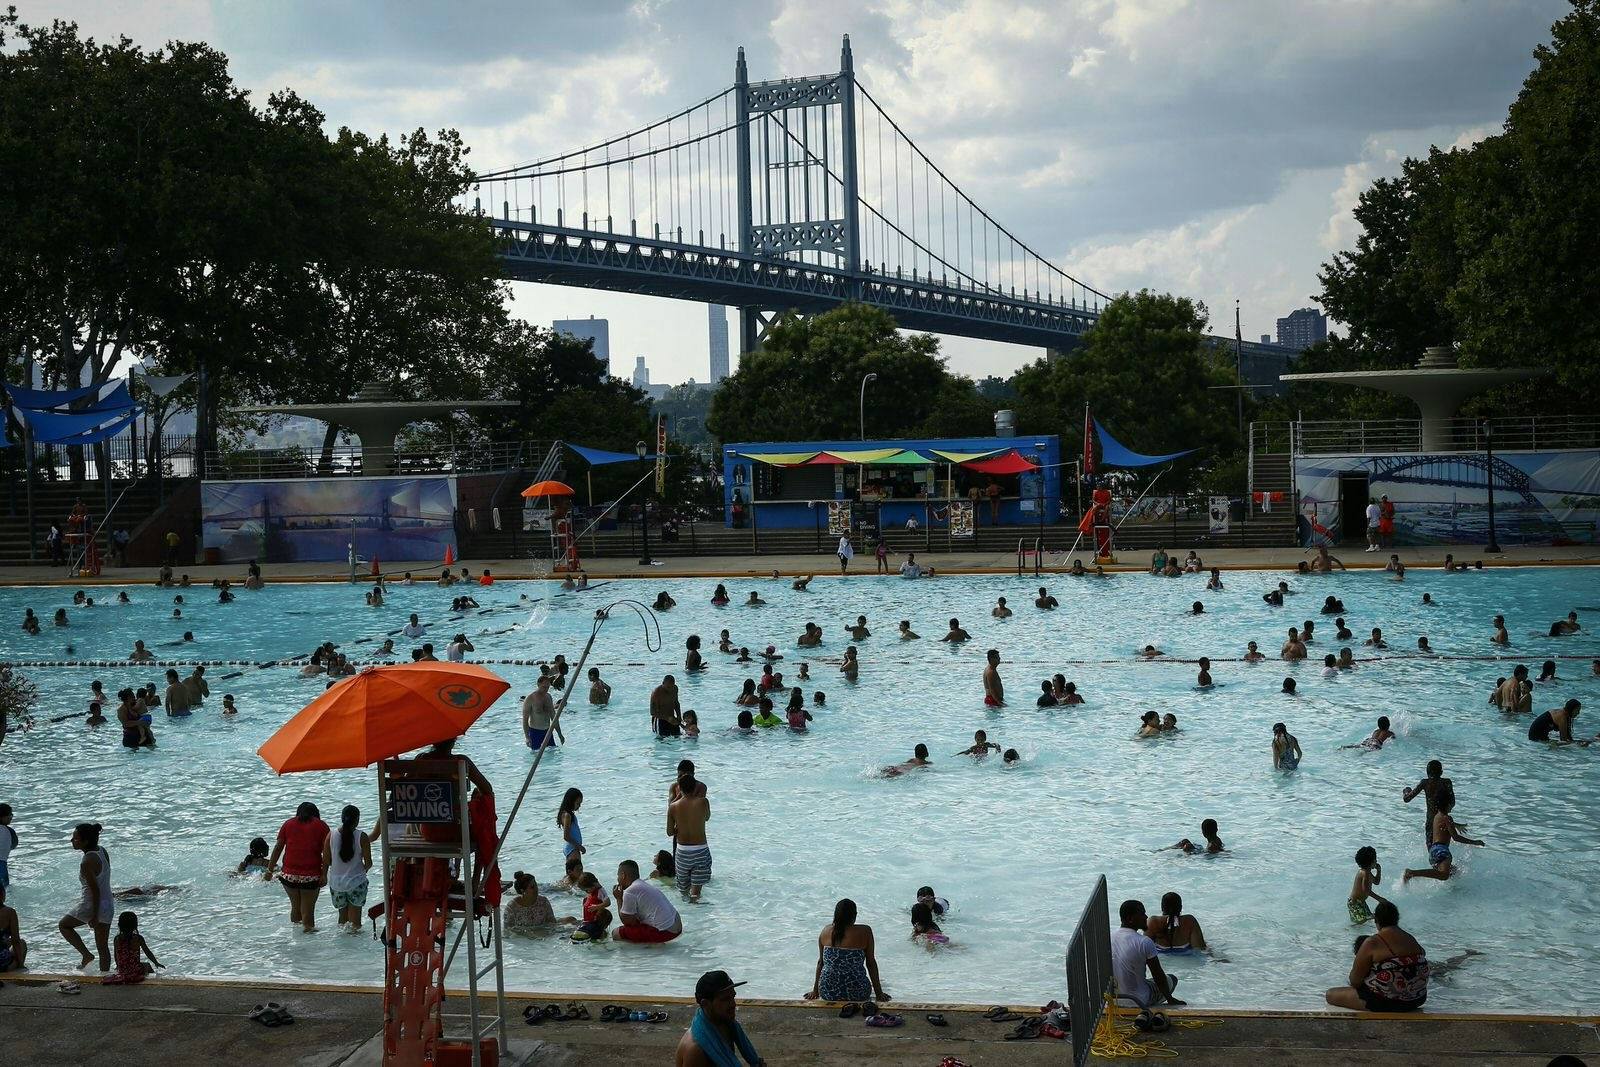 People enjoy a warm day at the Astoria Park Pool in New York with the RFK bridge visible in the background.